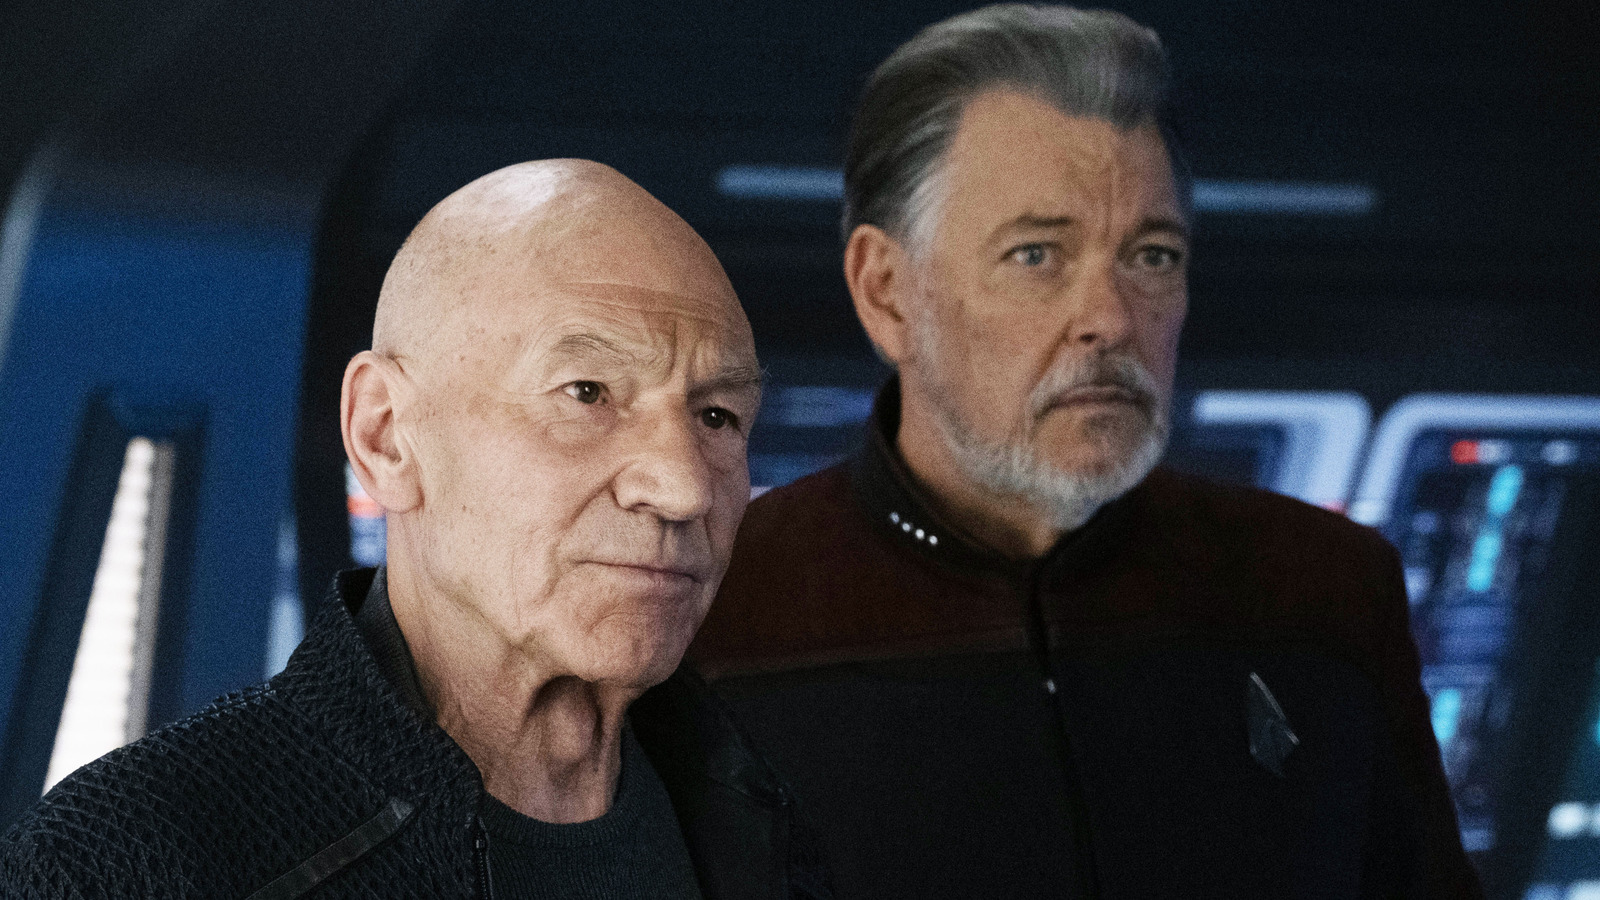 Star Trek: Picard' builds on the DNA of the 'The Next Generation